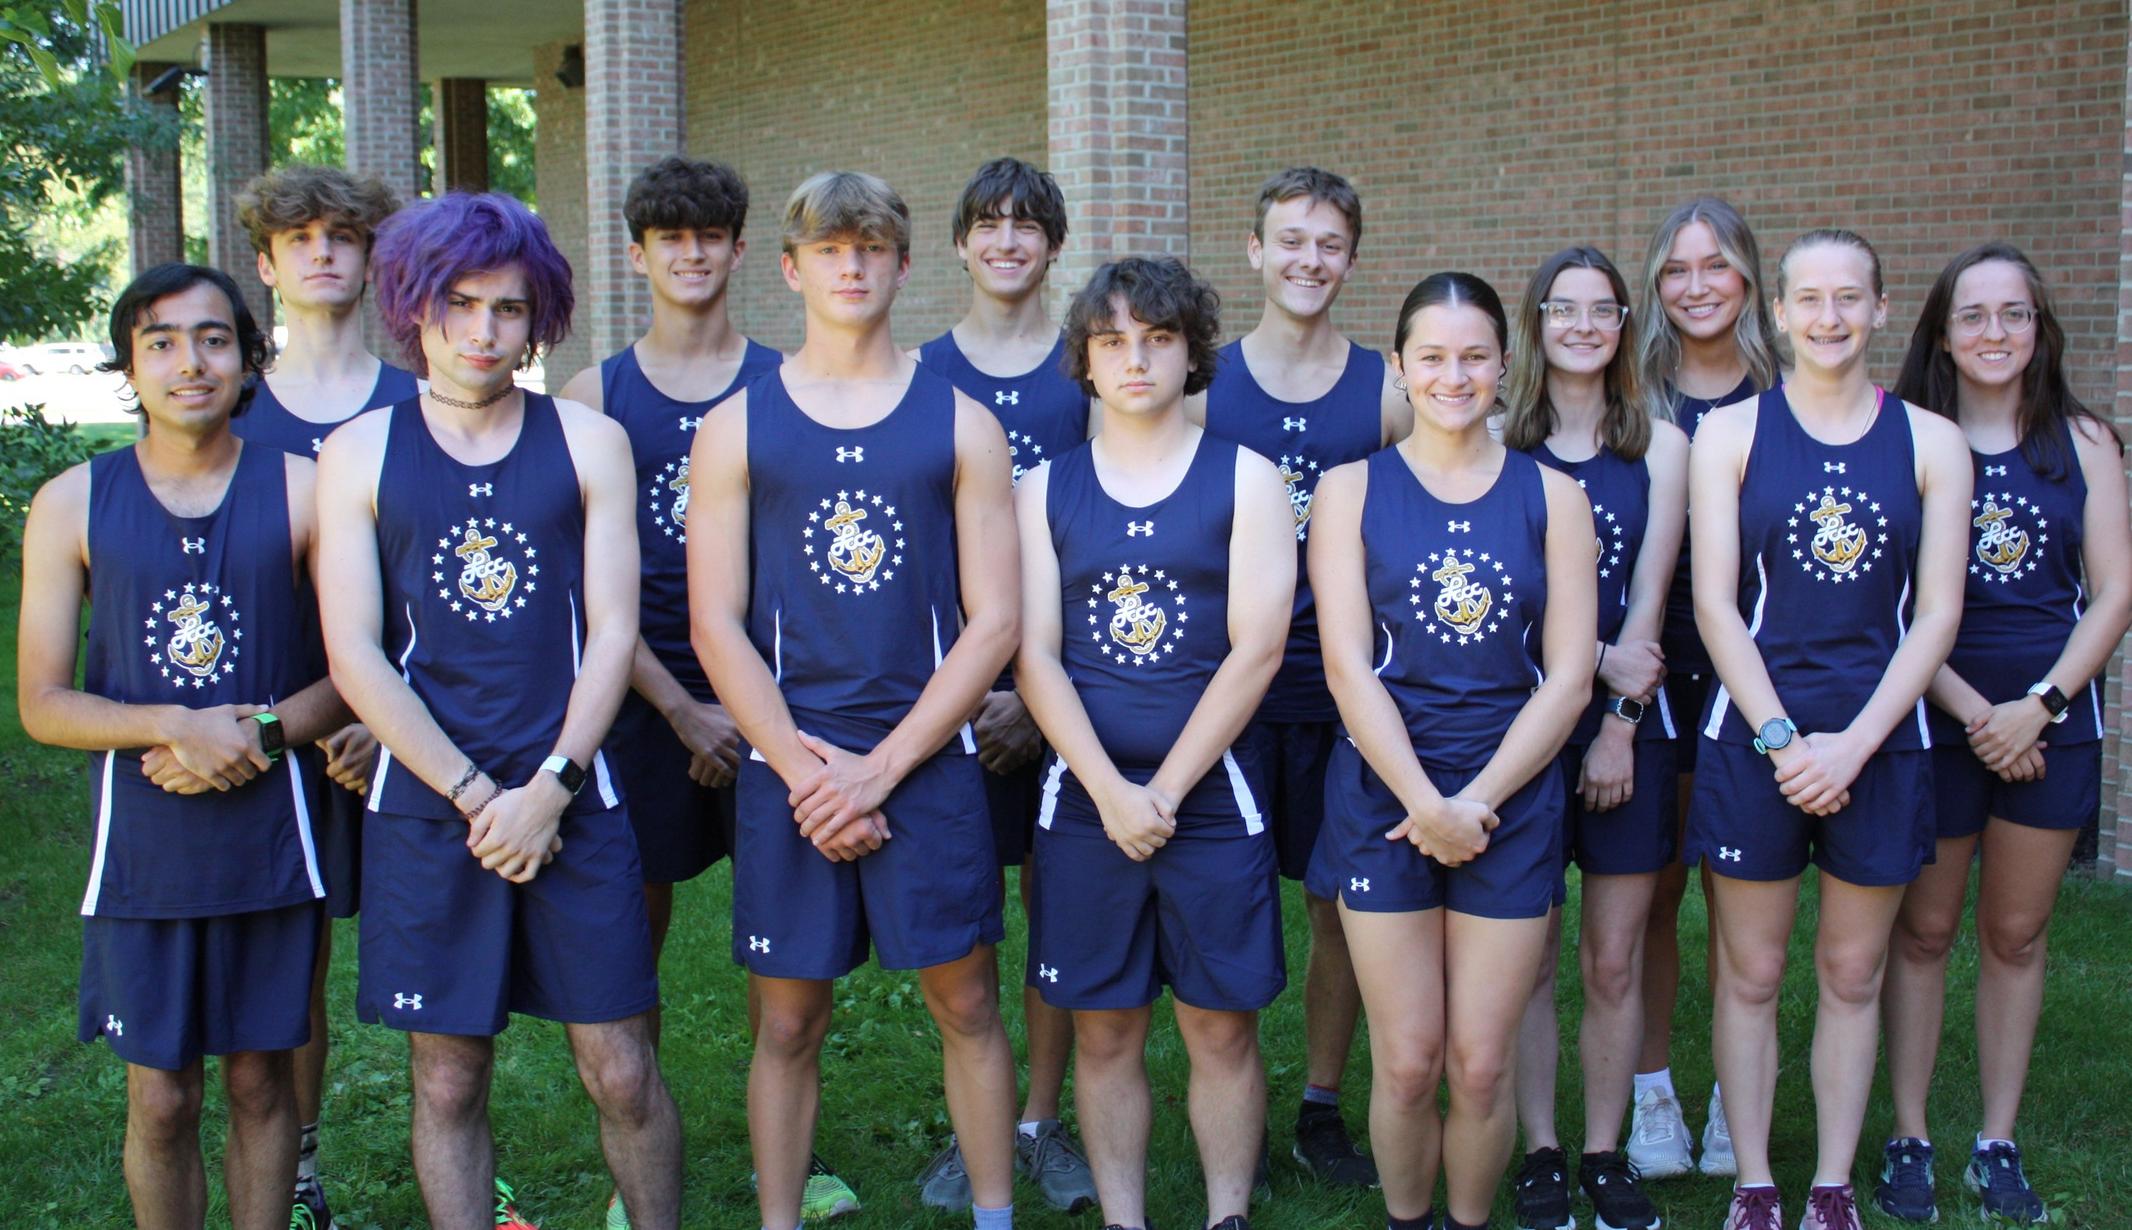 LCCC Cross Country Runs At Falcon Invite Hosted By Bowling Green